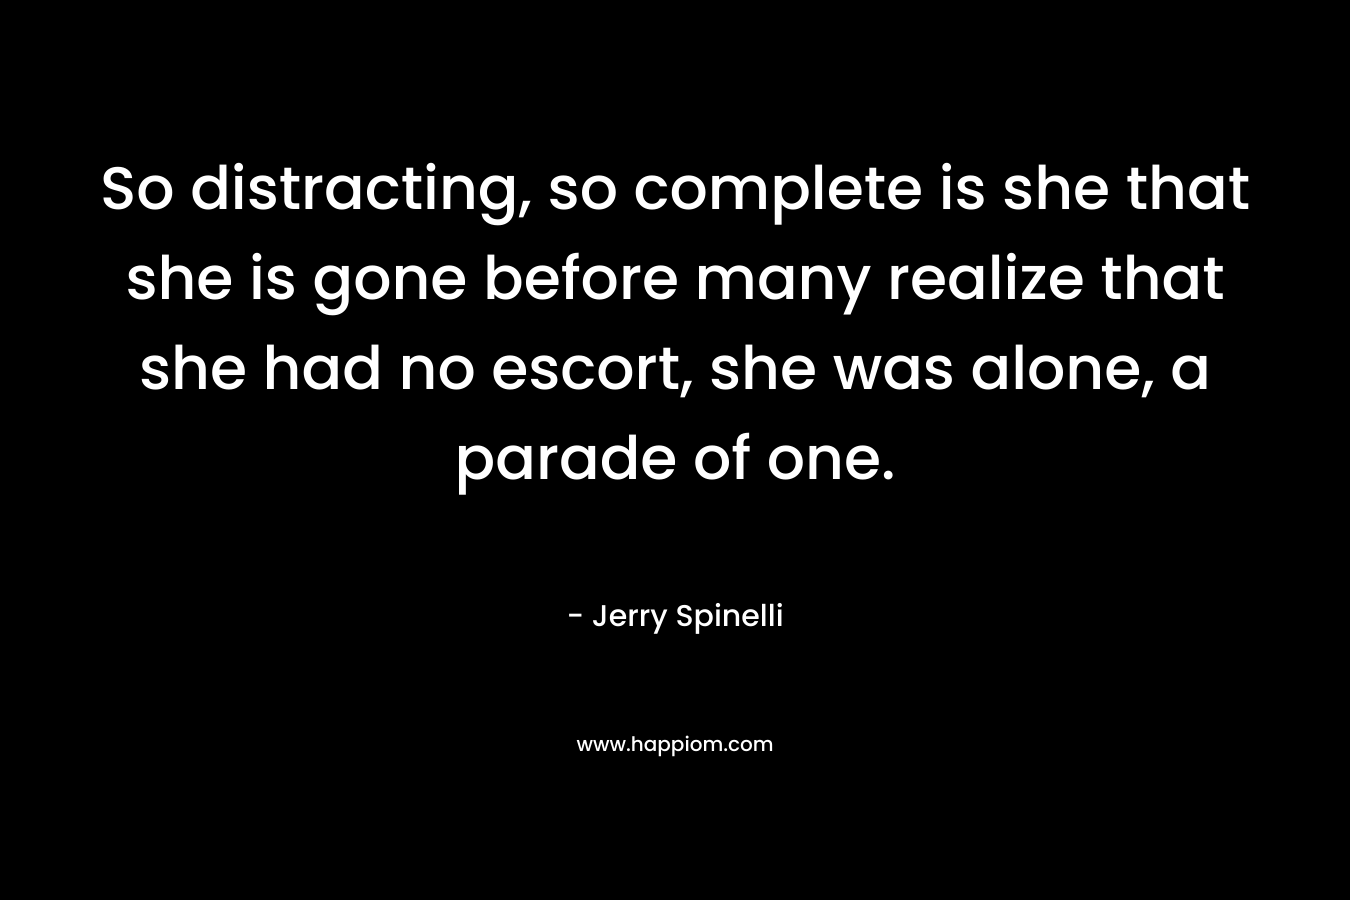 So distracting, so complete is she that she is gone before many realize that she had no escort, she was alone, a parade of one. – Jerry Spinelli